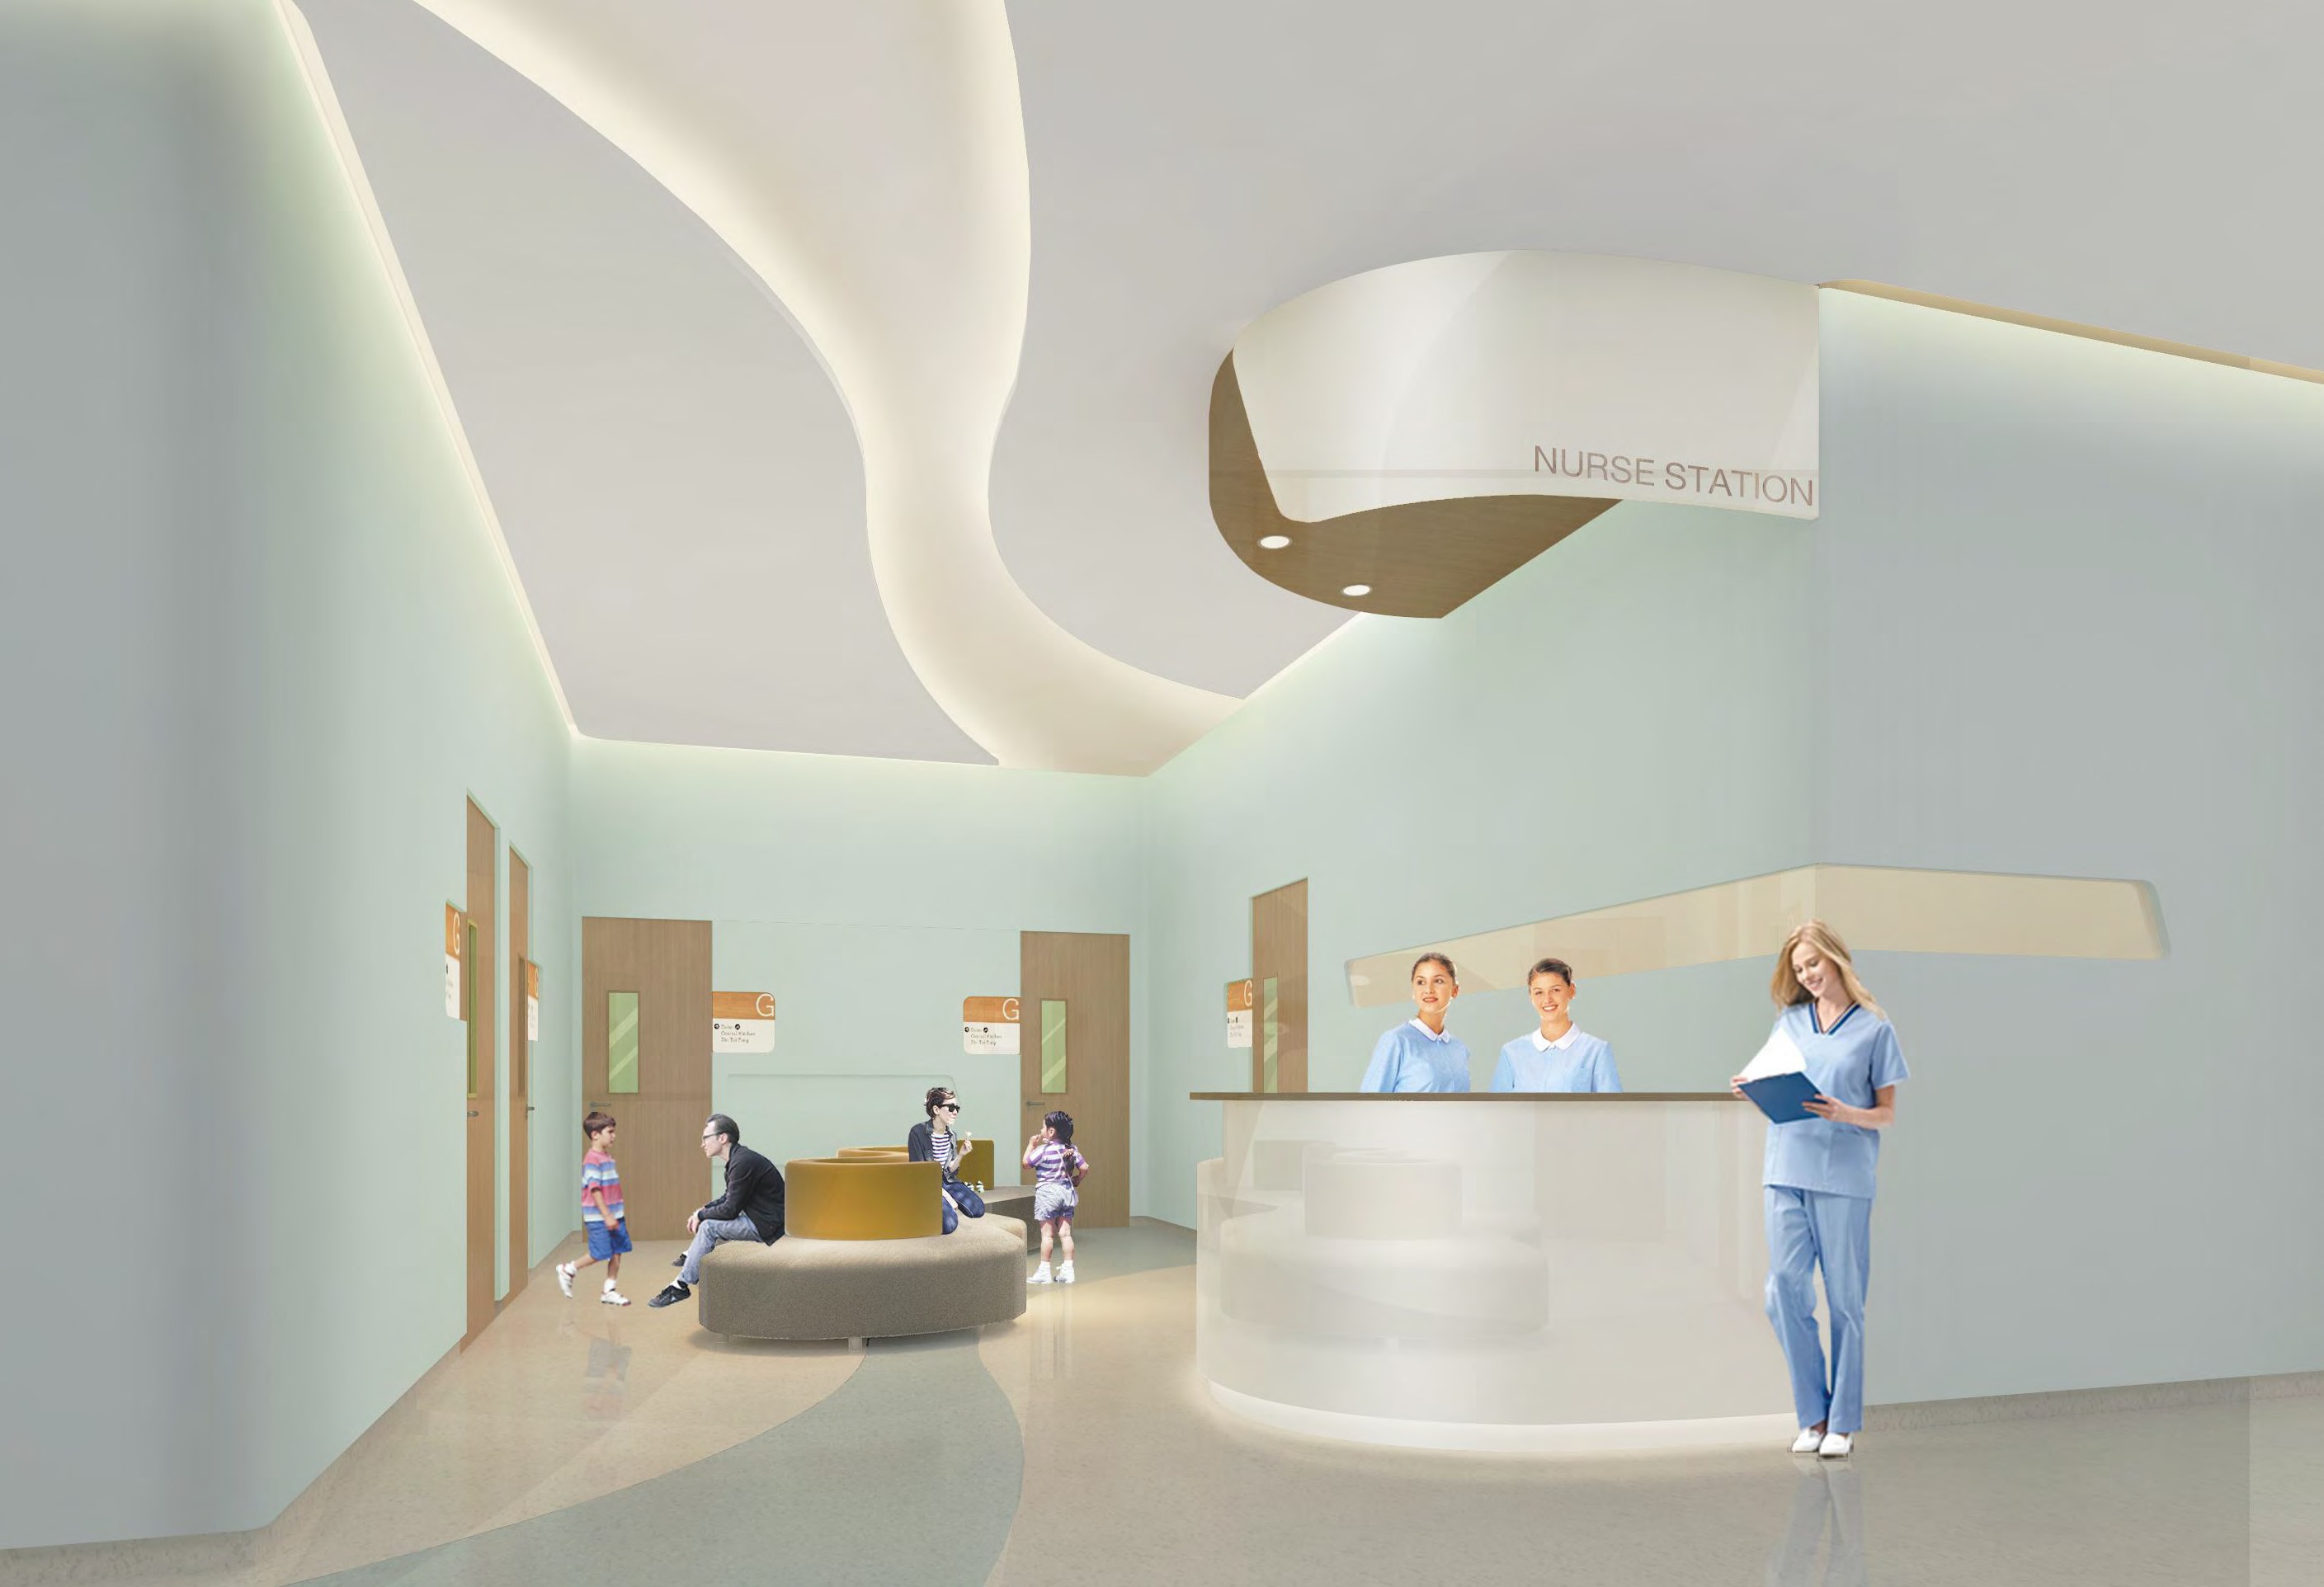 Hall design of Huihe maternity and confinement center